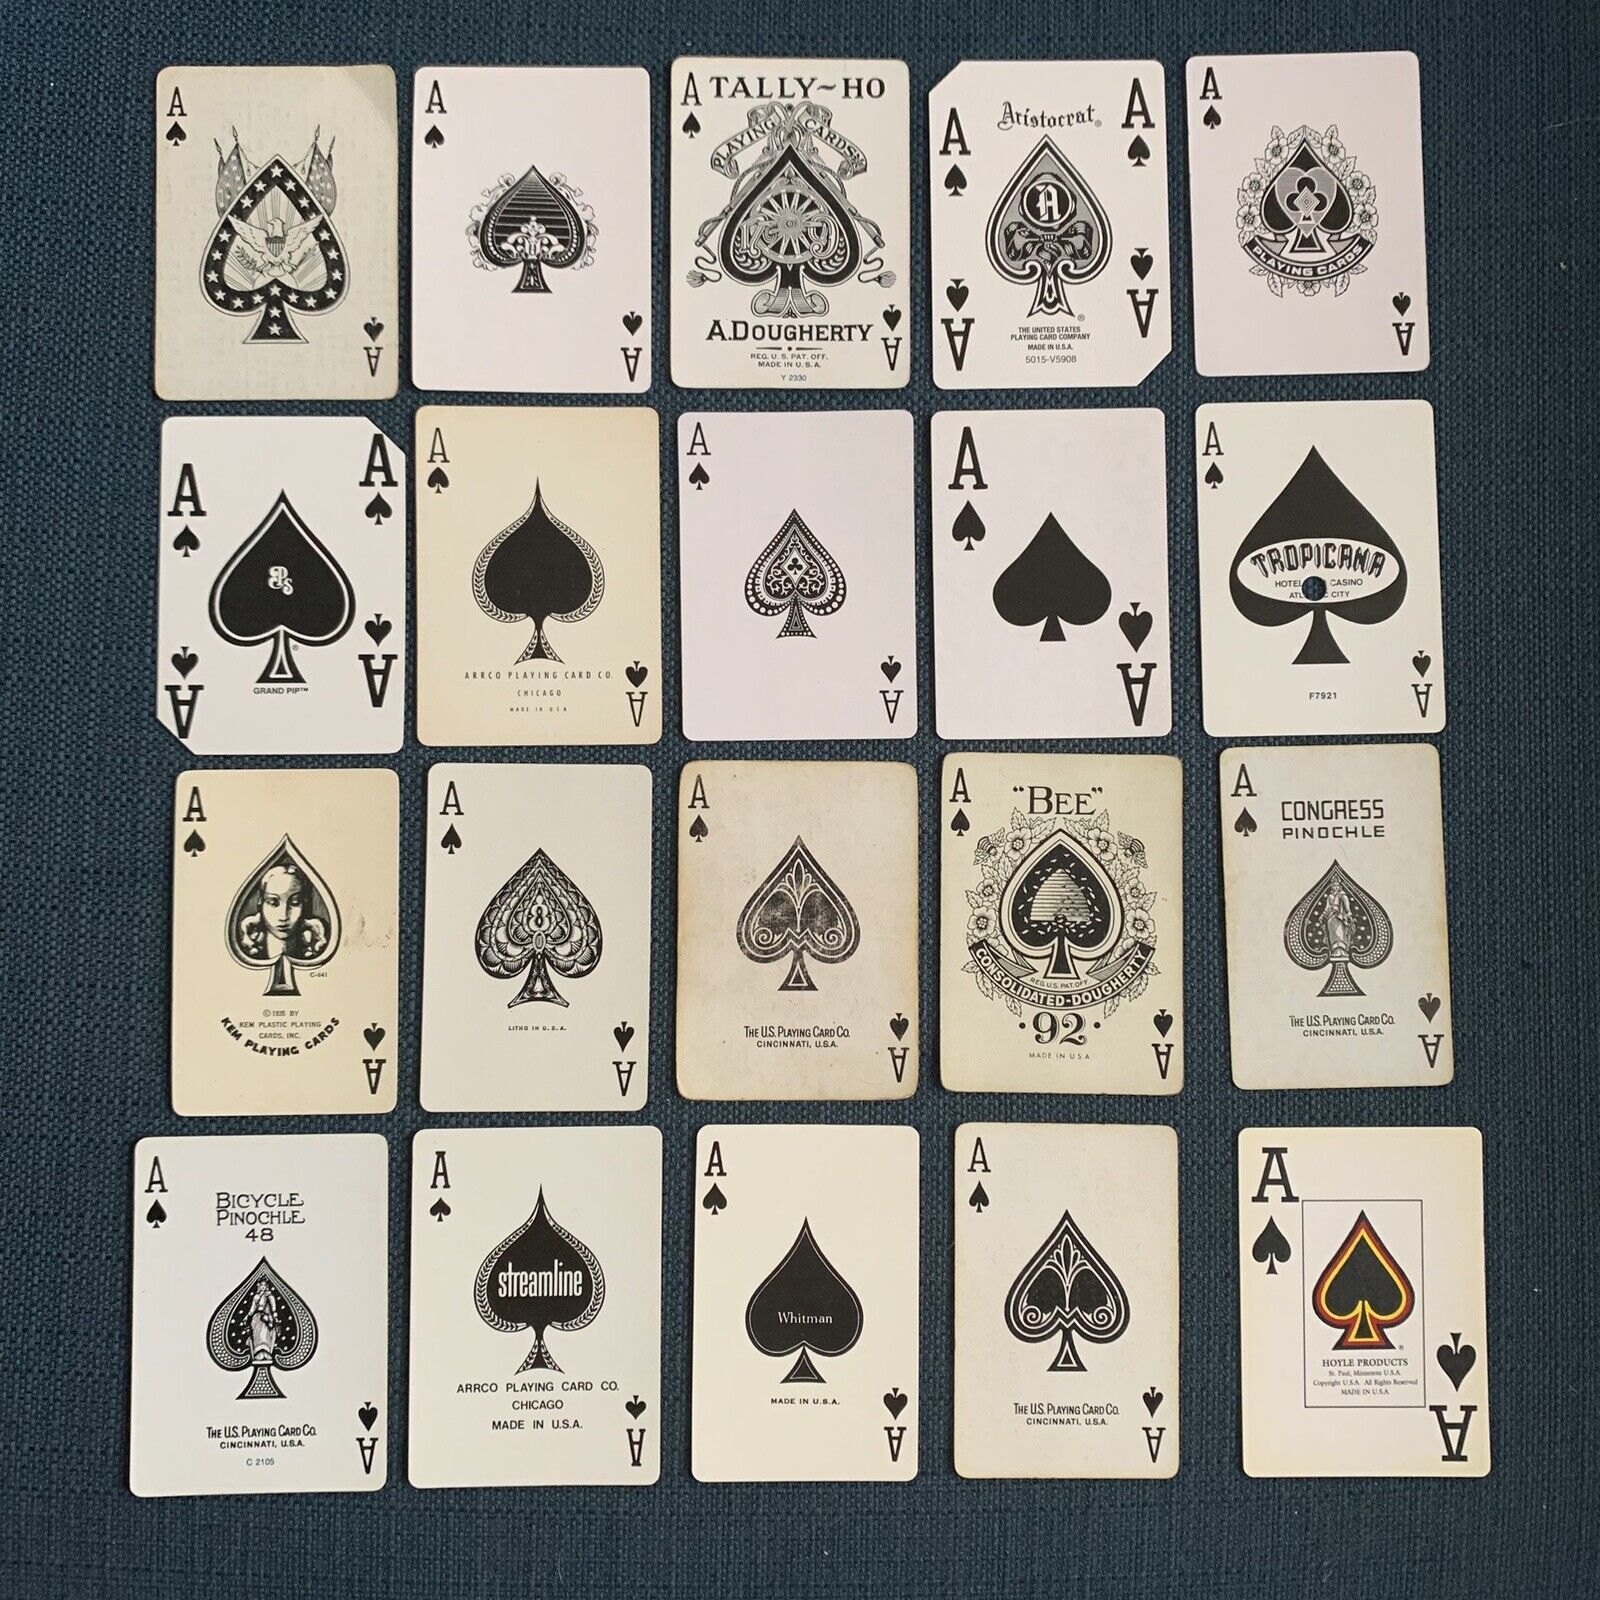 Vintage Single Swap Ace of Spades Playing Cards Unique Lot of 20 - Set #1